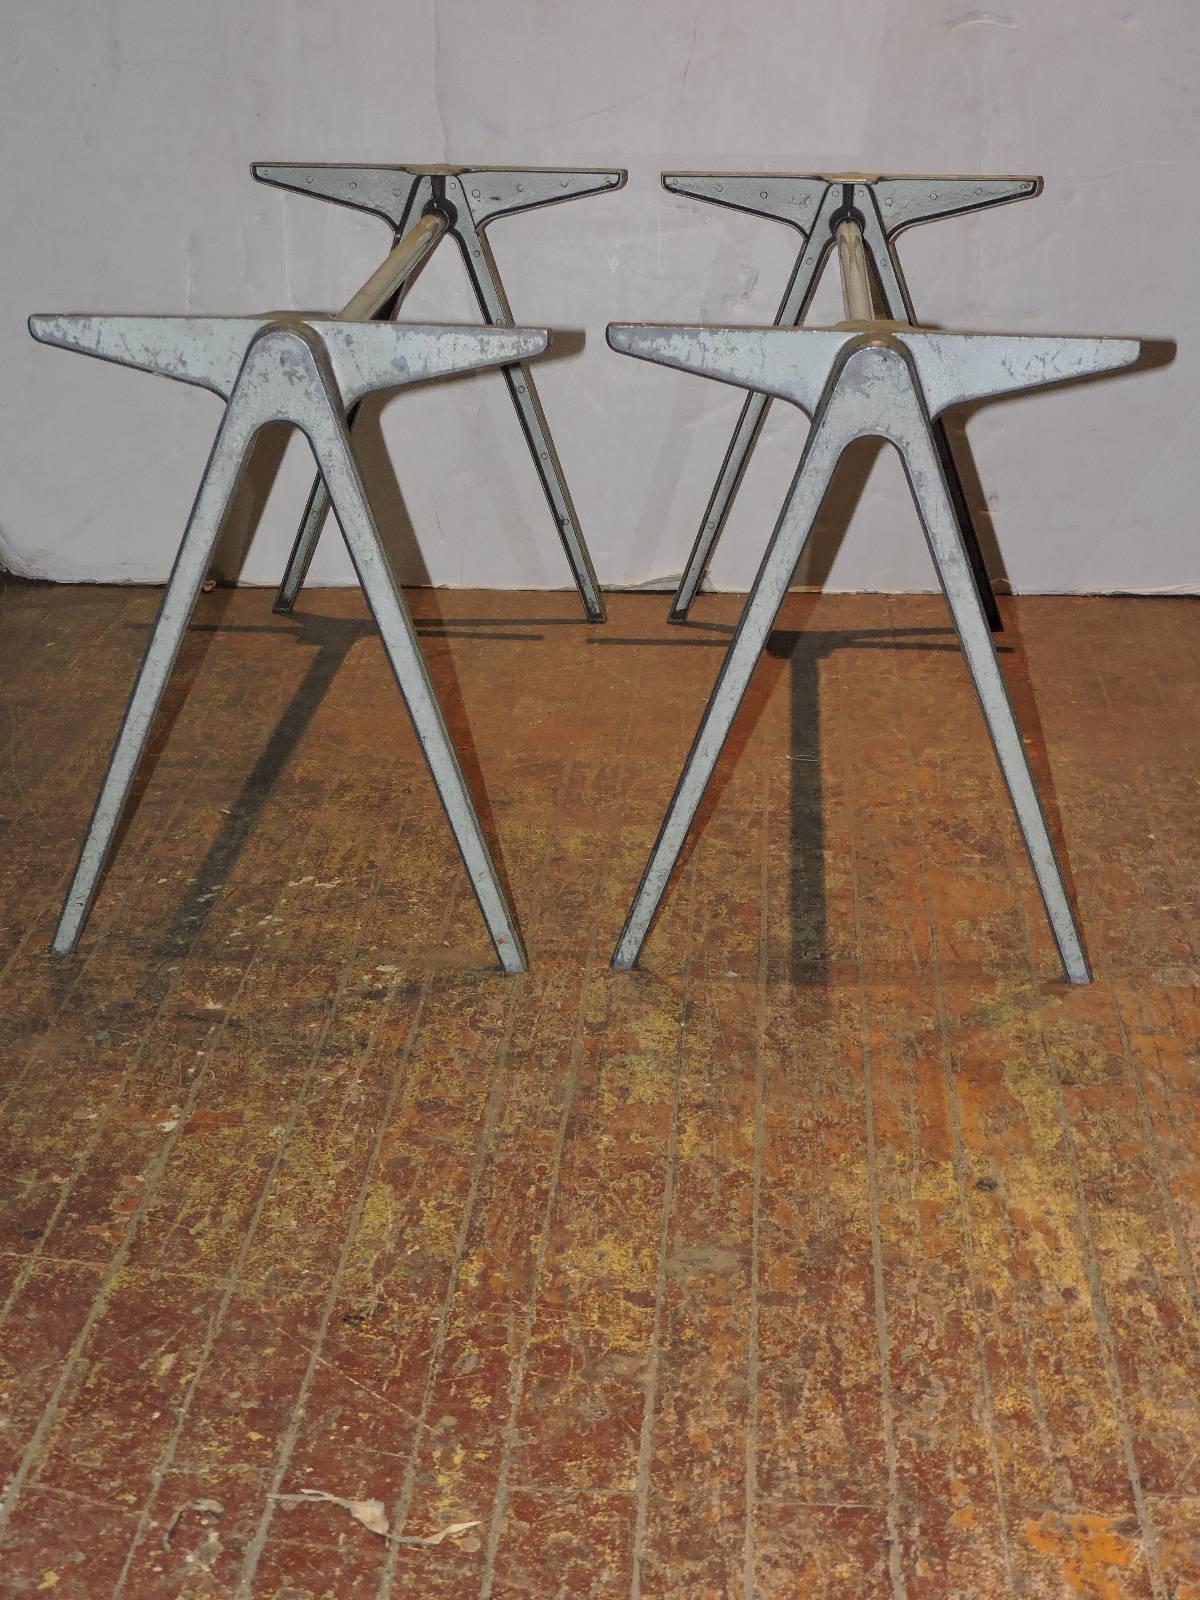 1940s modernist industrial aluminum compass table bases / benches by James Leonard for Esavian in the style of Jean Prouve  ( these were supposedly manufactured a few years earlier than the Prouve compass table design ). The ends with beautifully